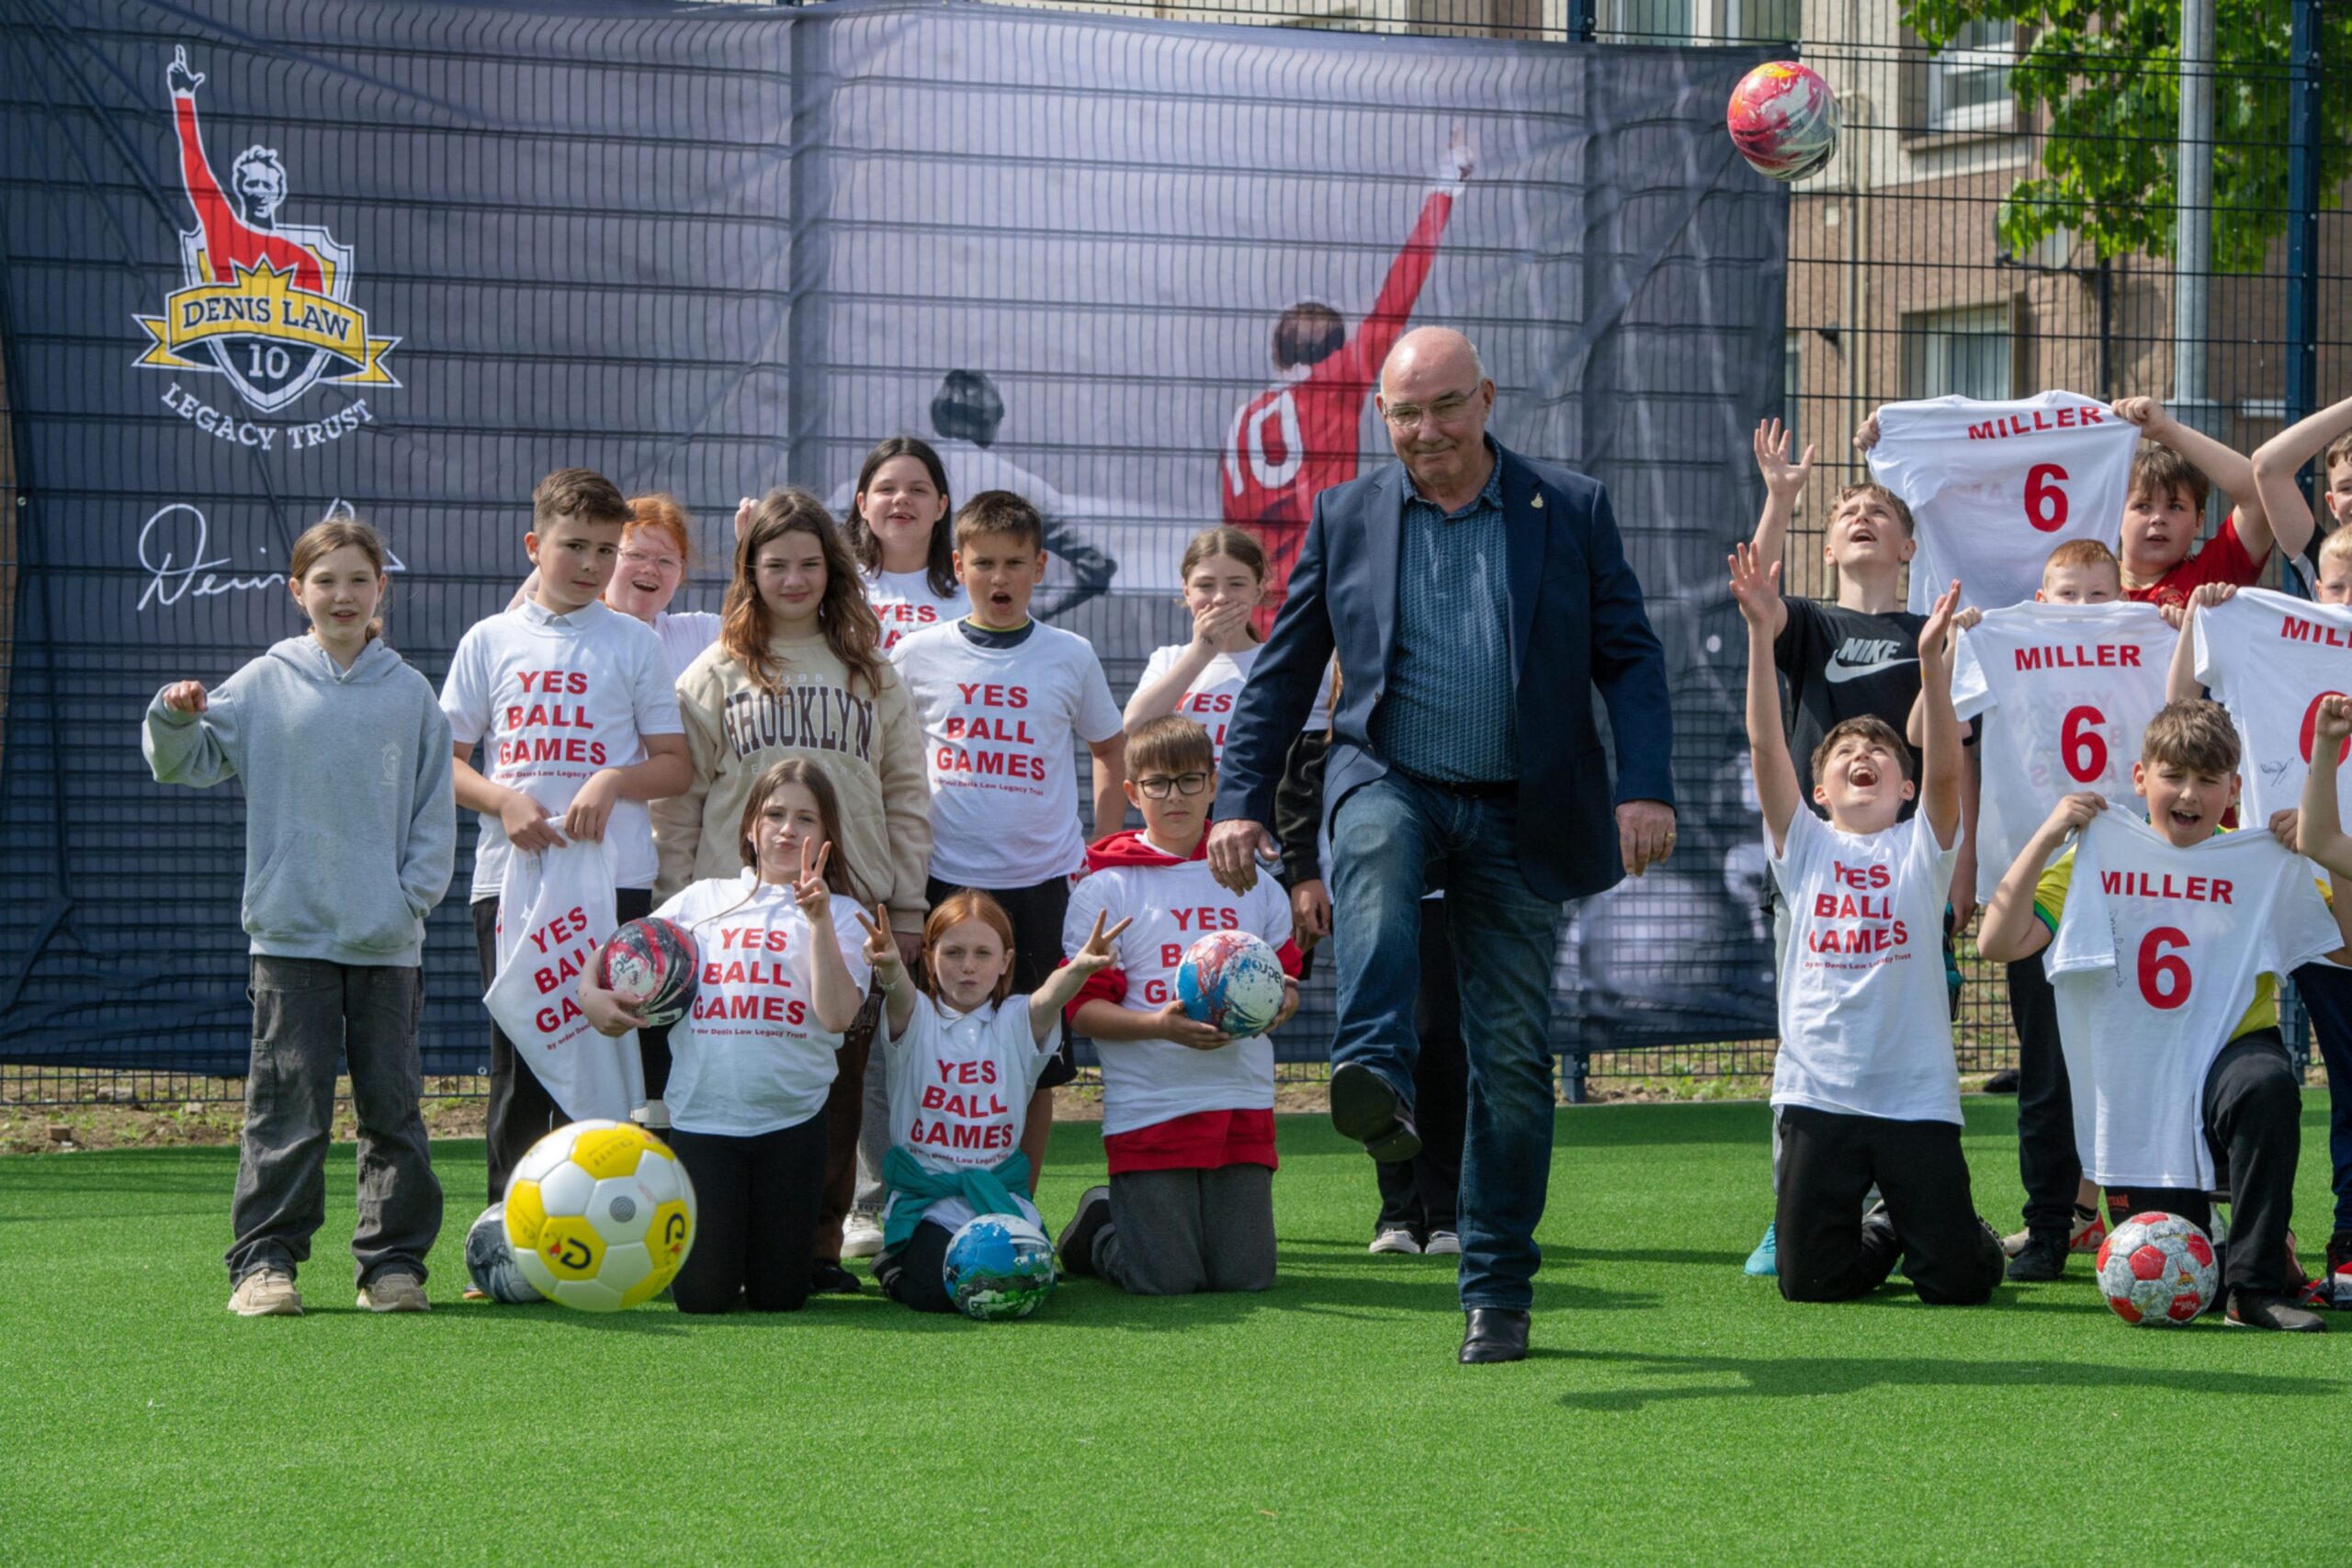 Willie Miller opening the new Cruyff Court with local kids.